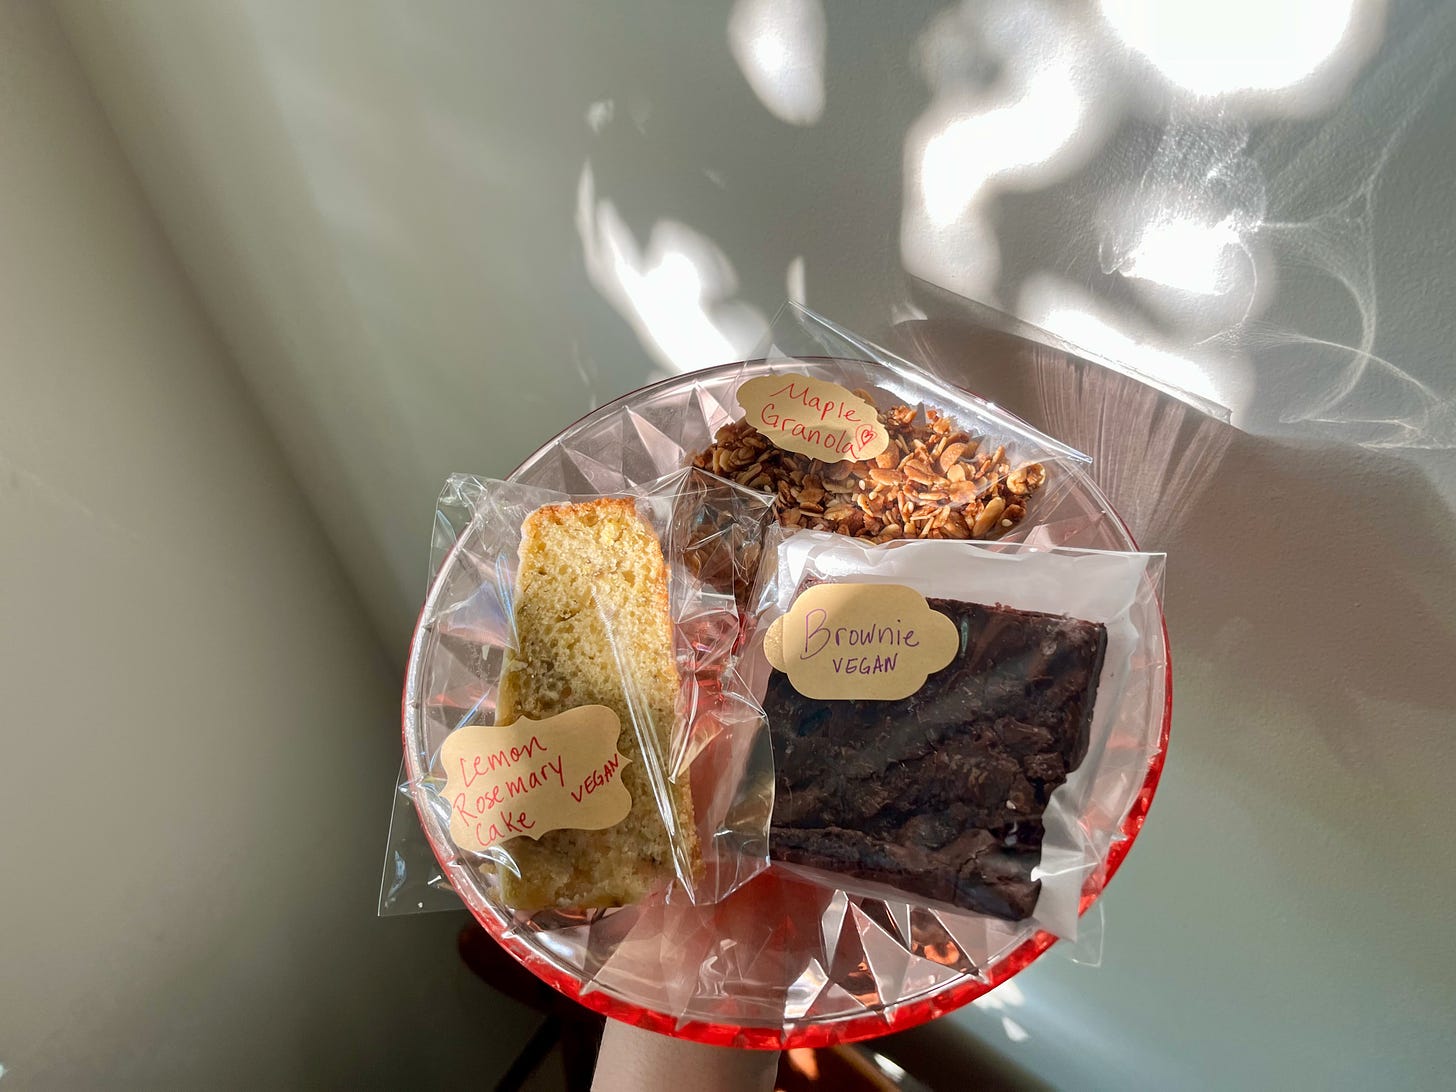 I hold three treats wrapped in cellophane bags on a cake plate: Lemon Rosemary Cake, Maple Granola, and a Brownie. The light is pretty.